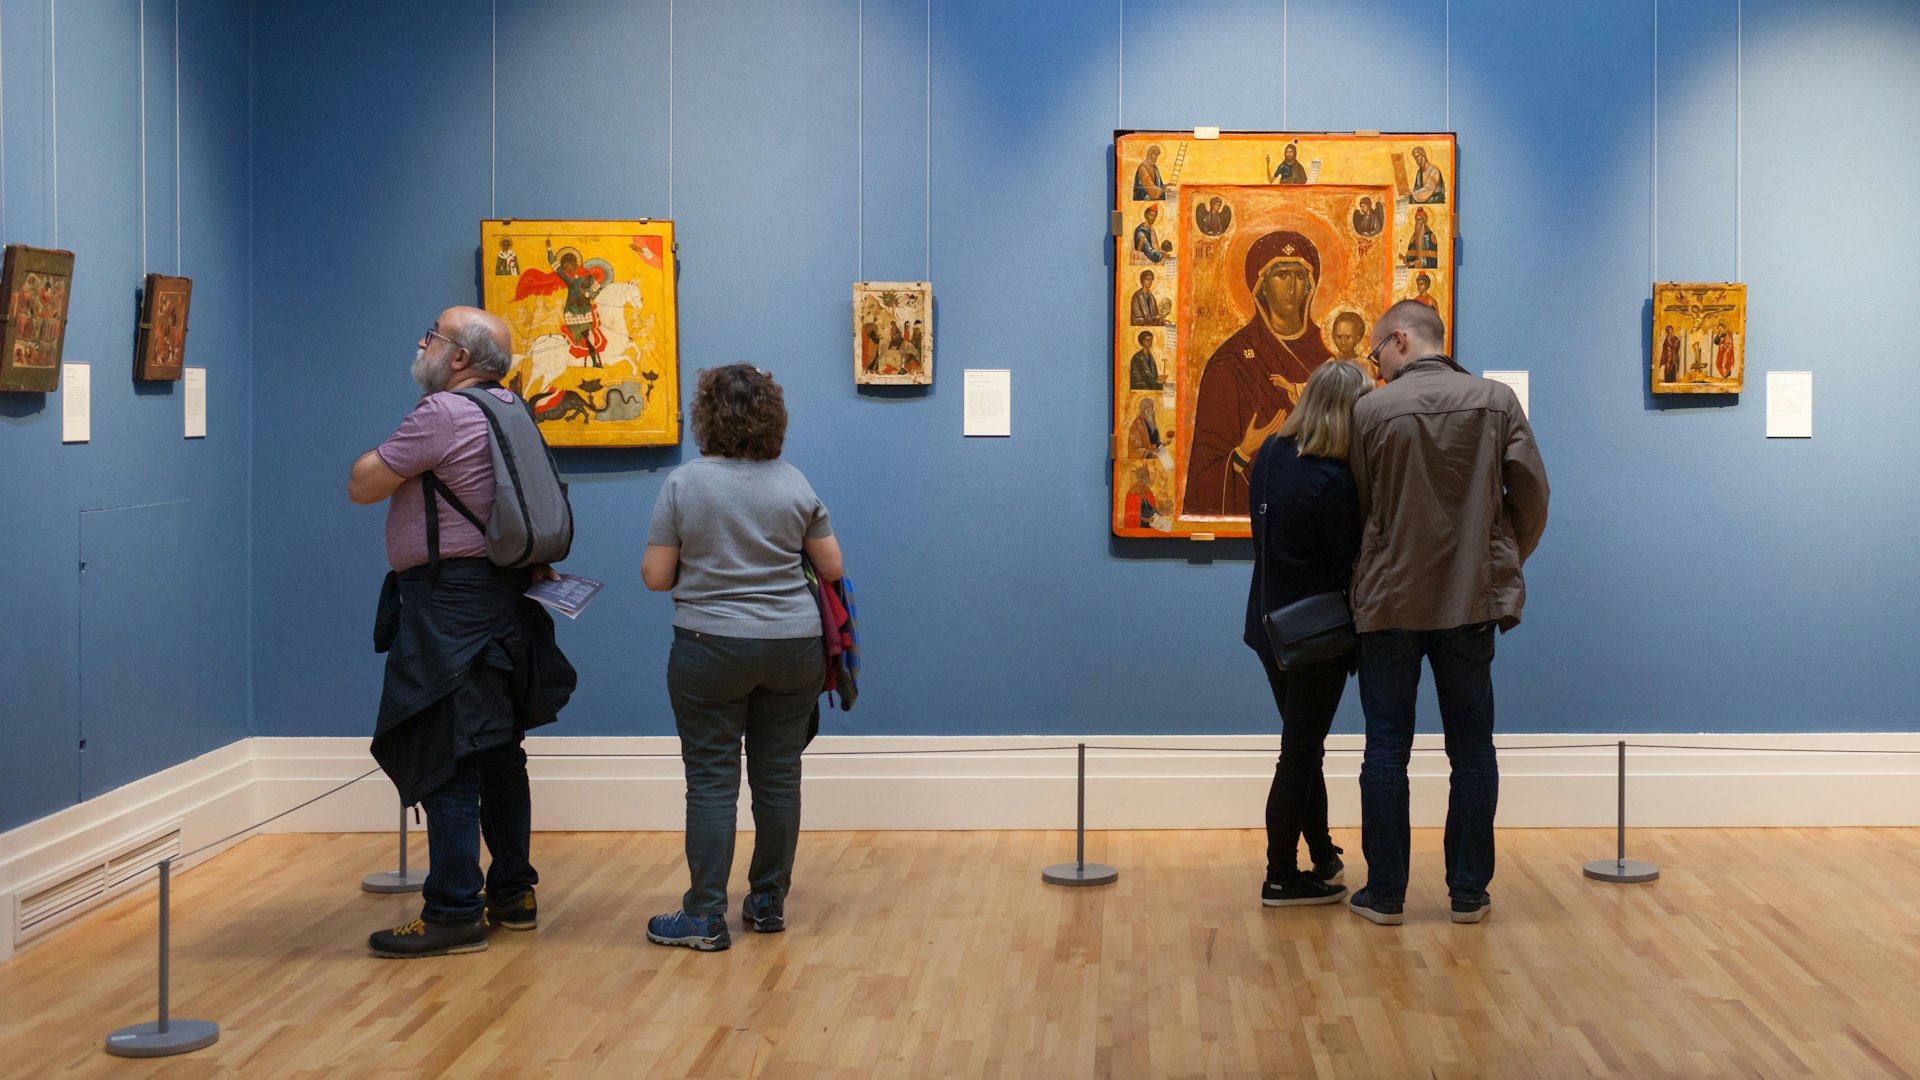 People stand in an art gallery looking at the paintings on the wall